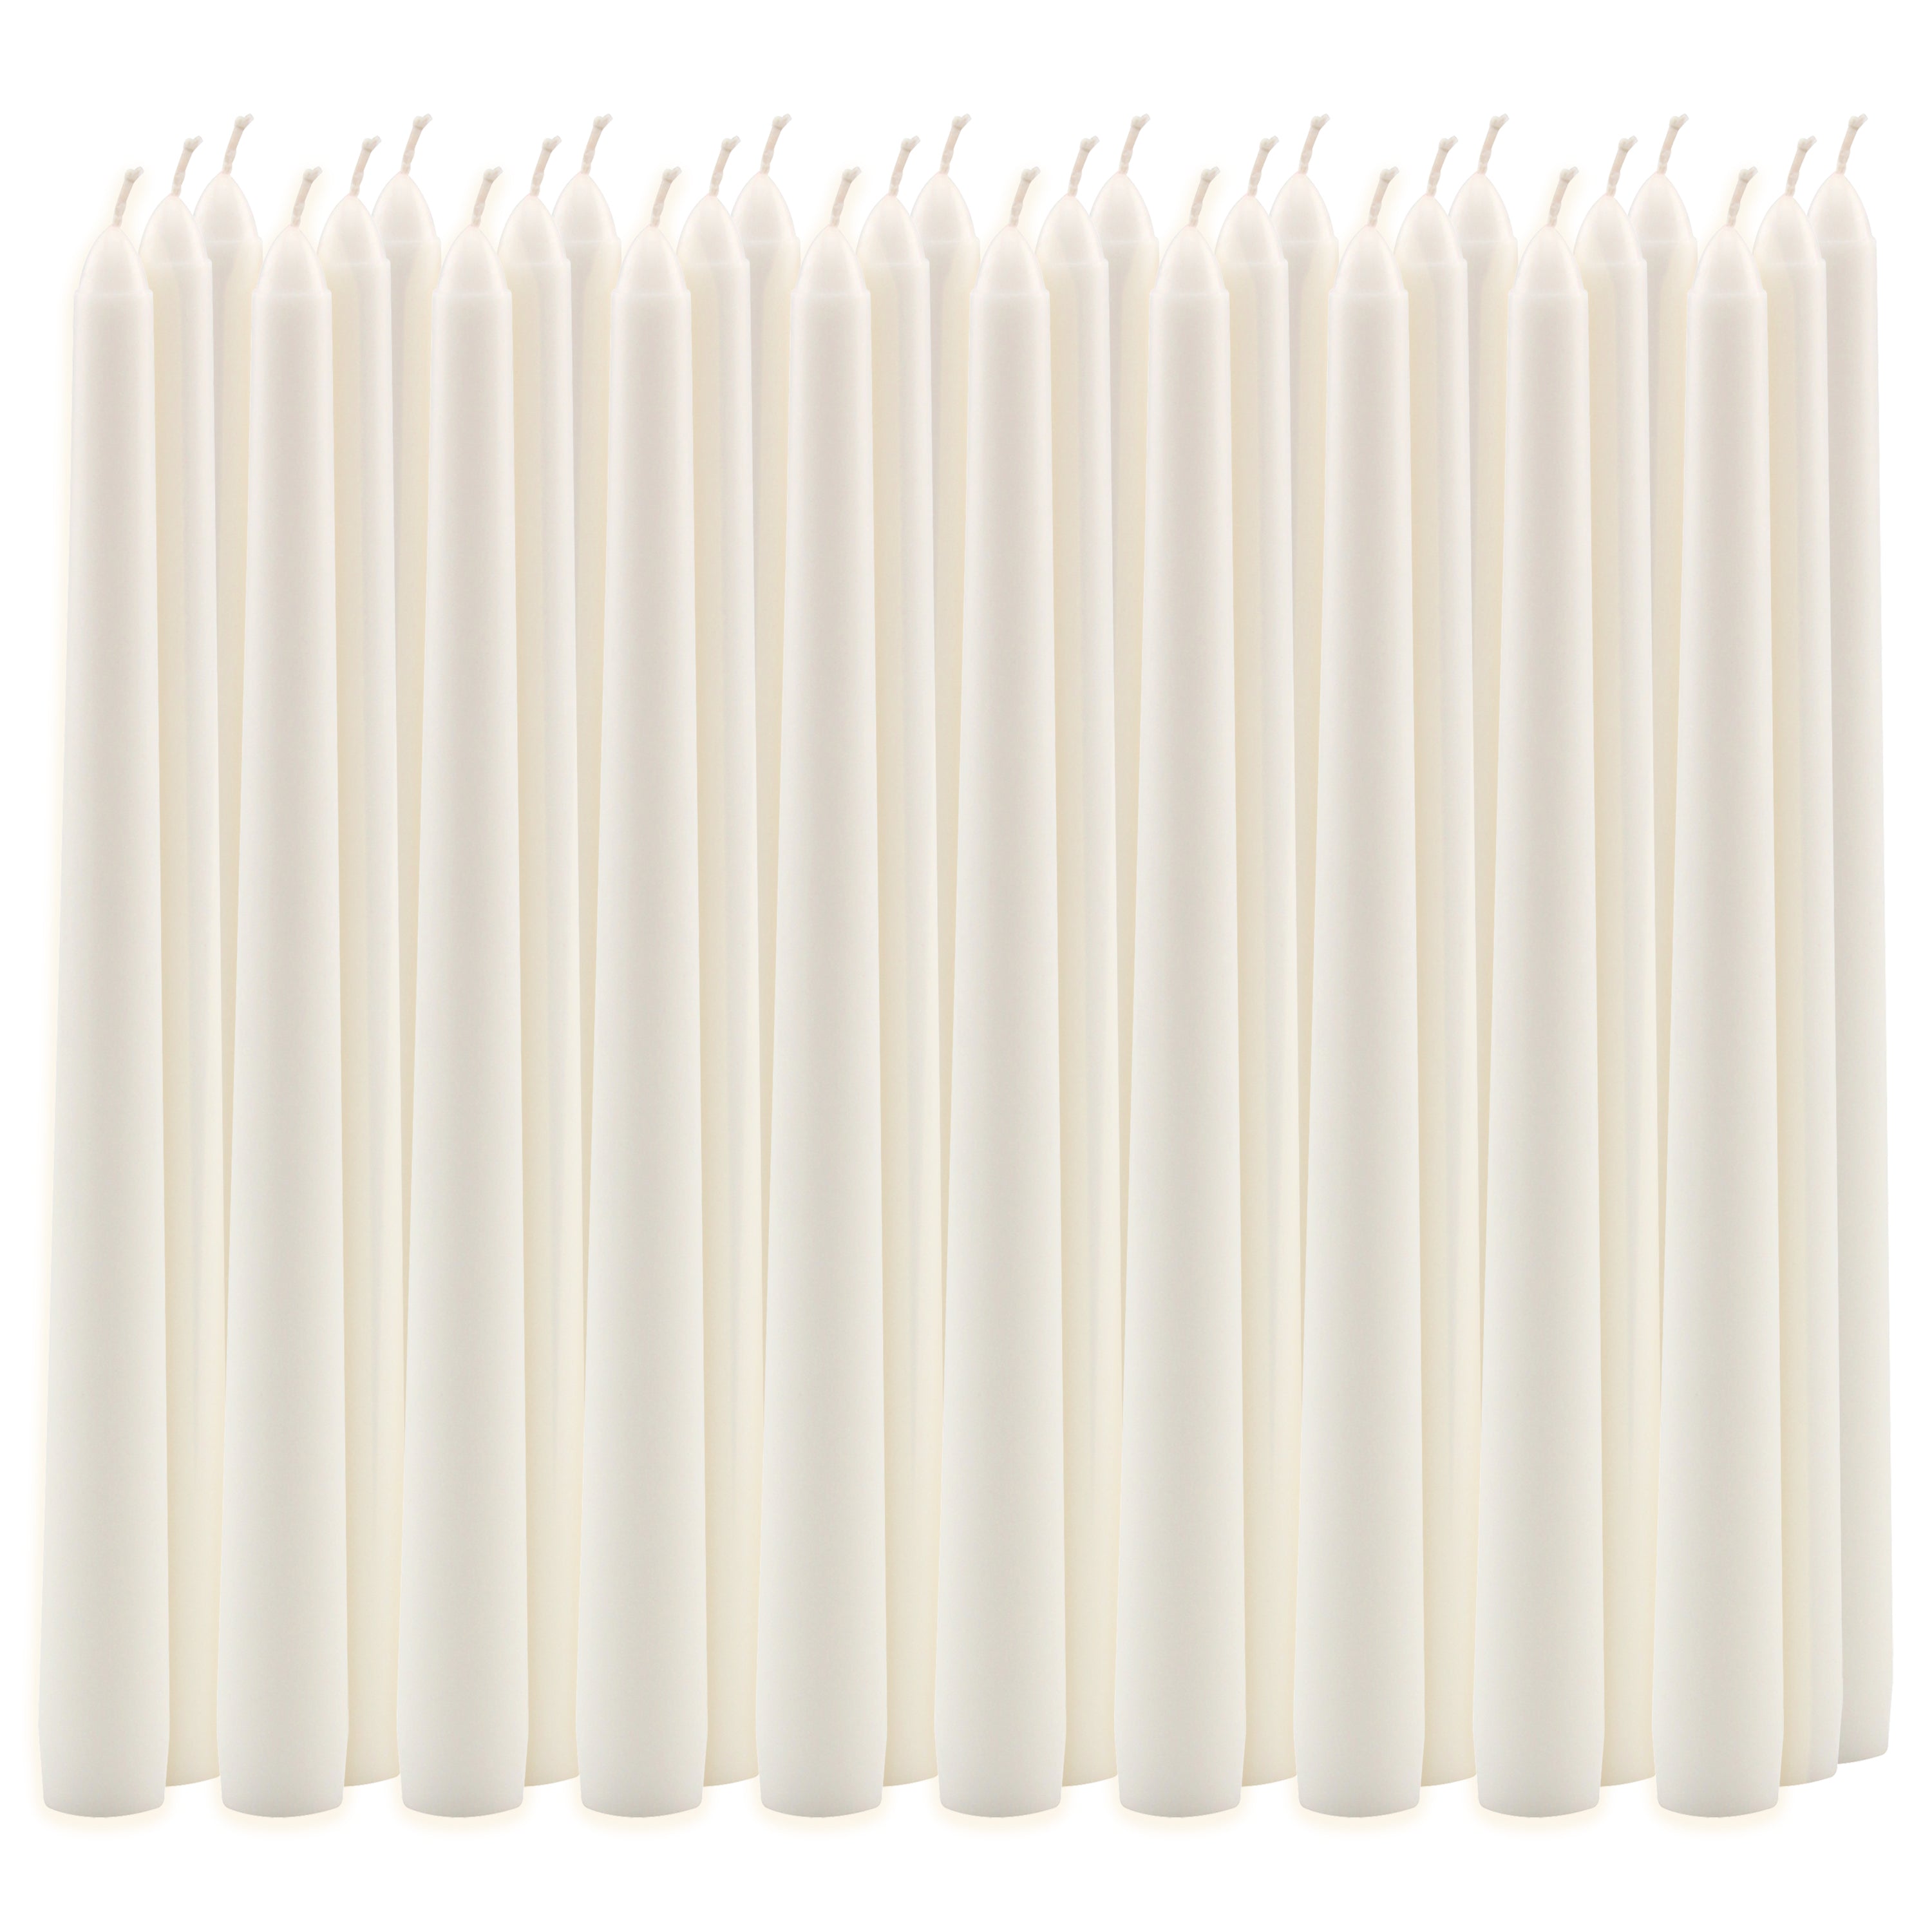 Tall 10" Unscented Dripless 30 Pack Taper Candles